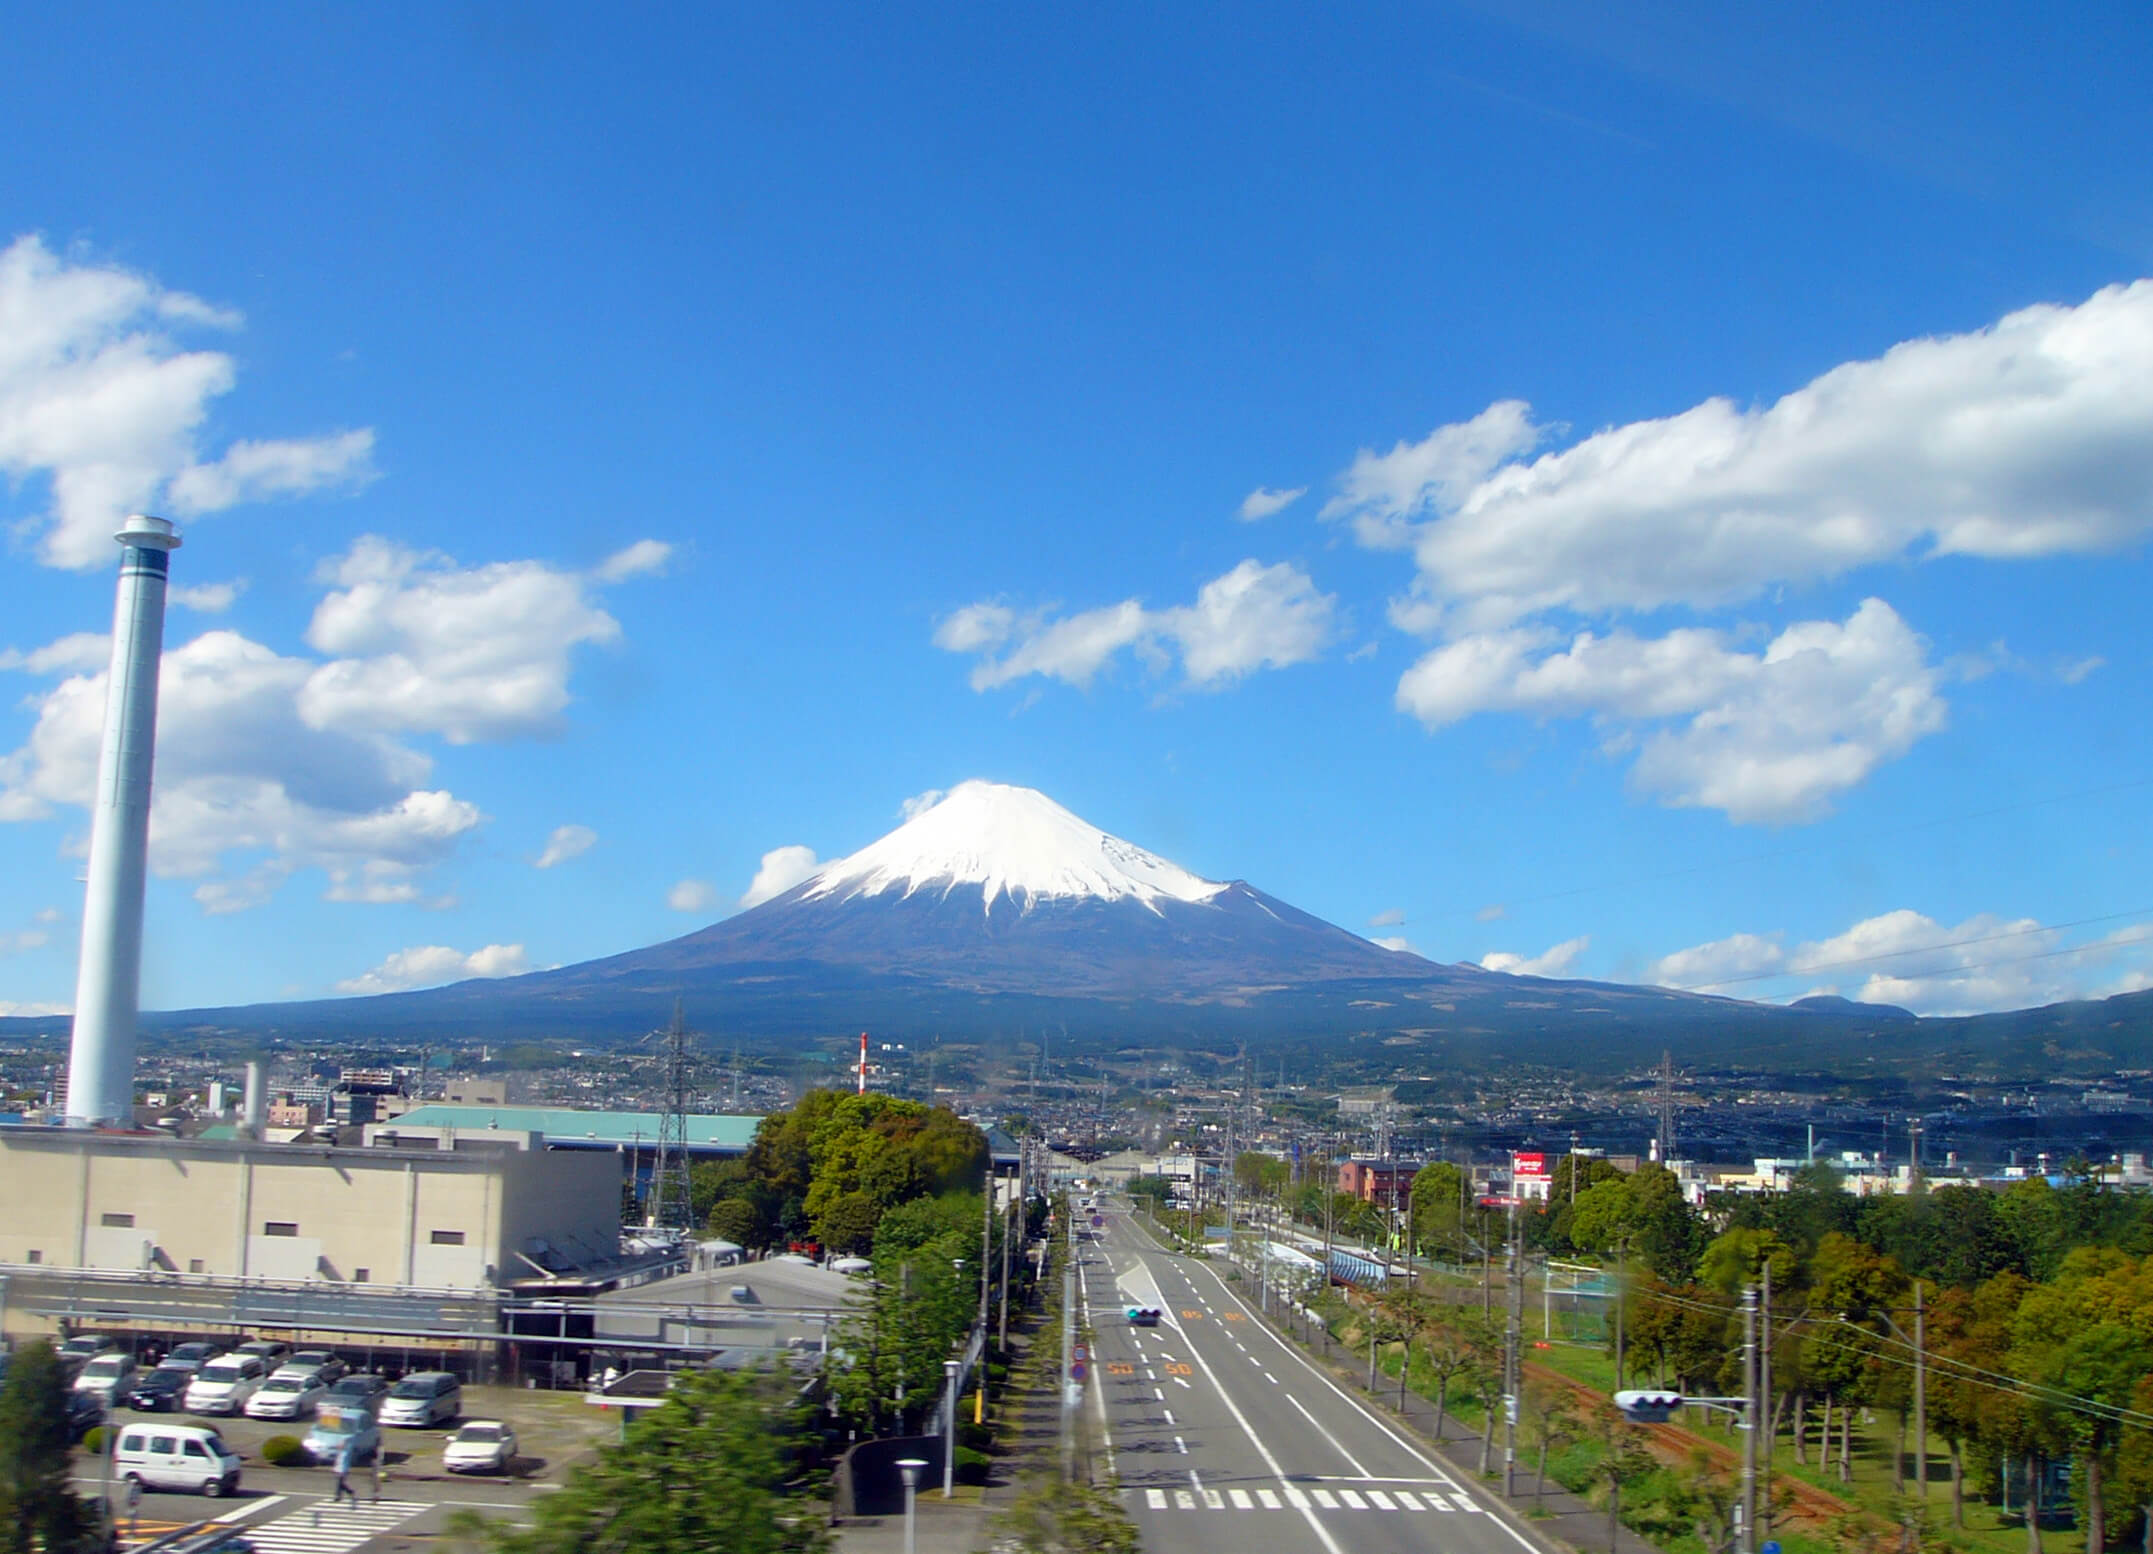 For some reason, Japan’s Mount Fuji will soon have Wi-Fi